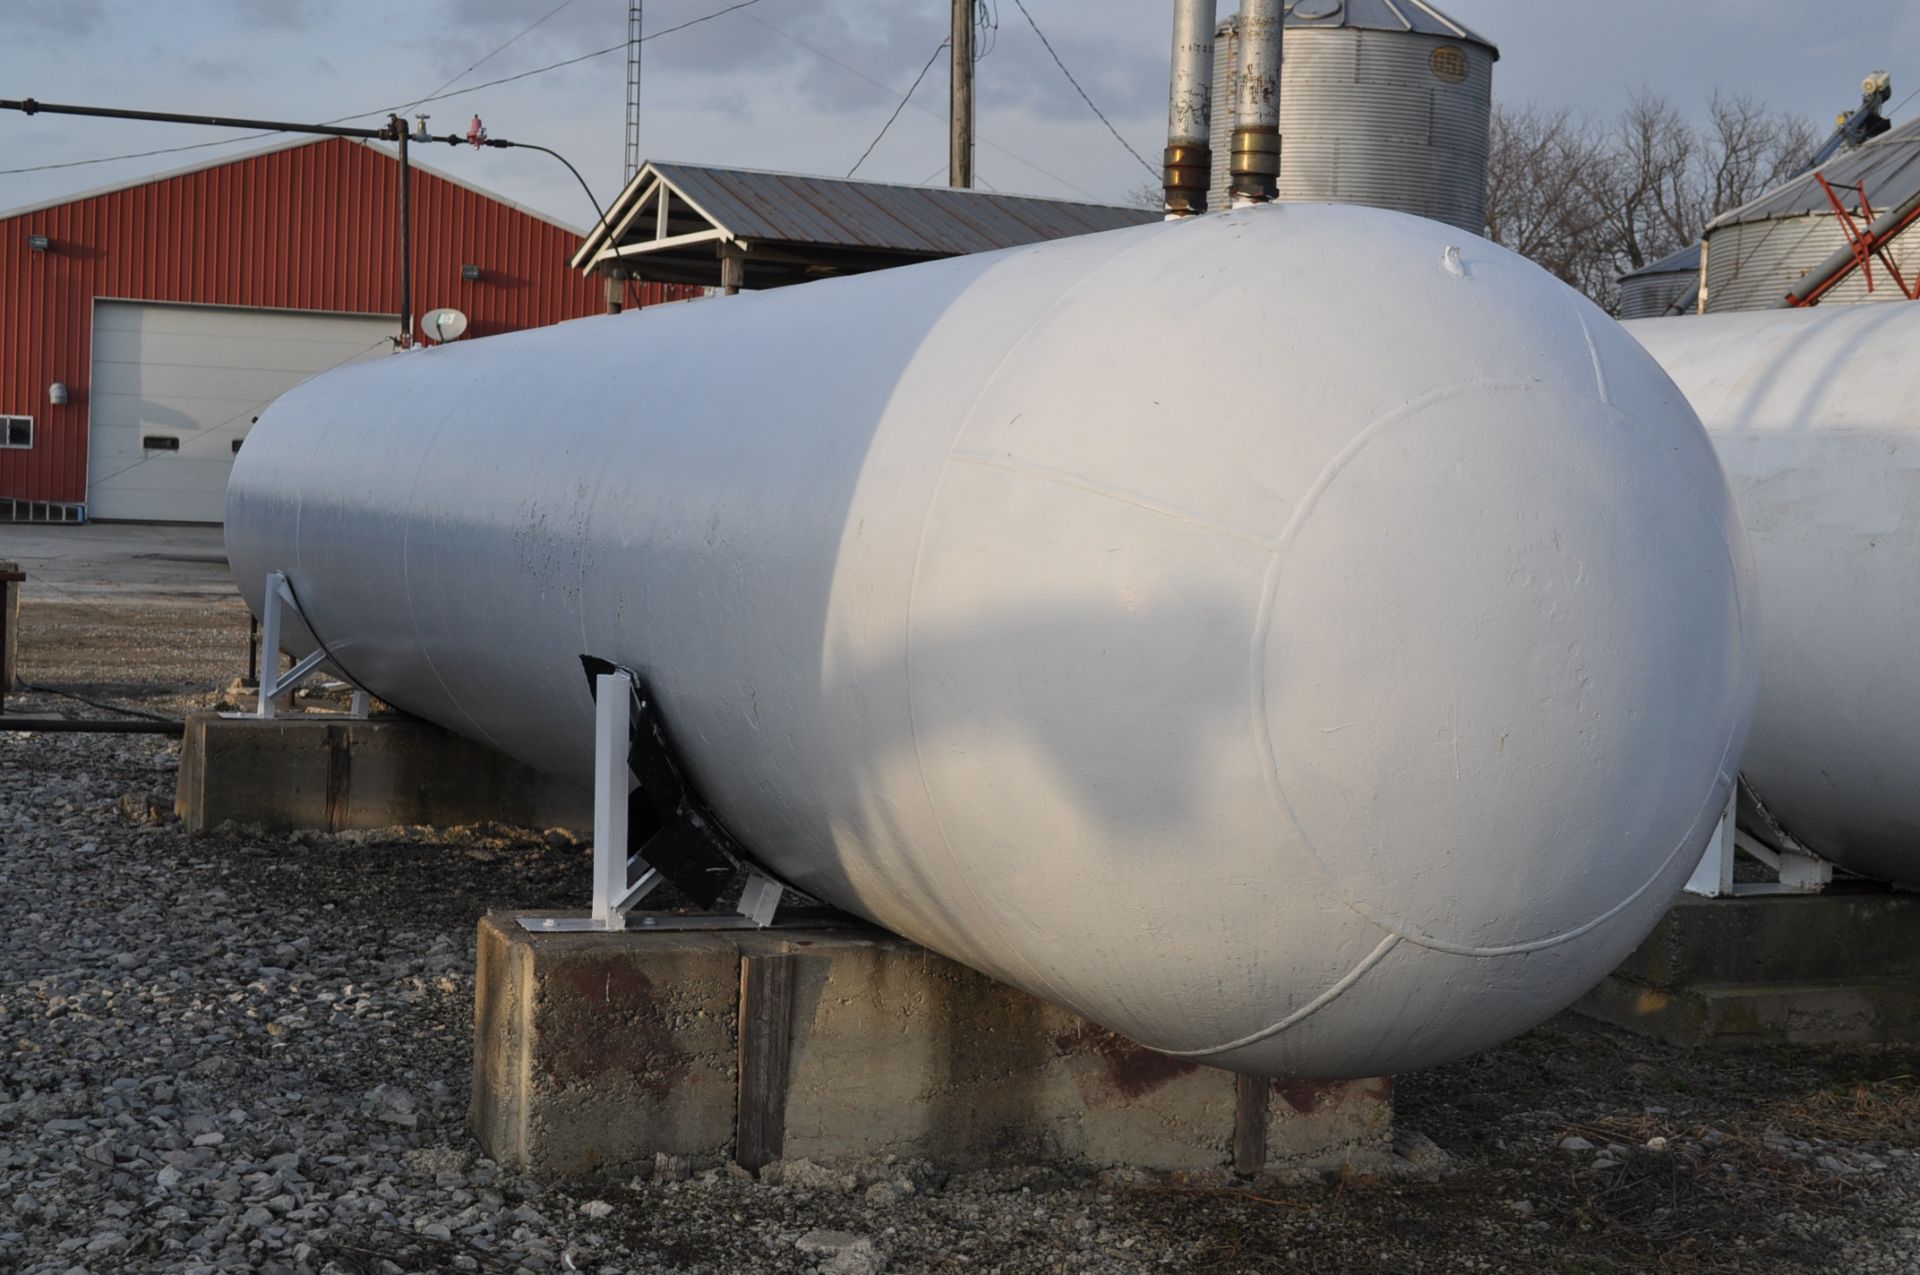 6000 gal propane tank, tank only no plumbing, 30 day removal, Located in Elyria Ohio - Image 6 of 6